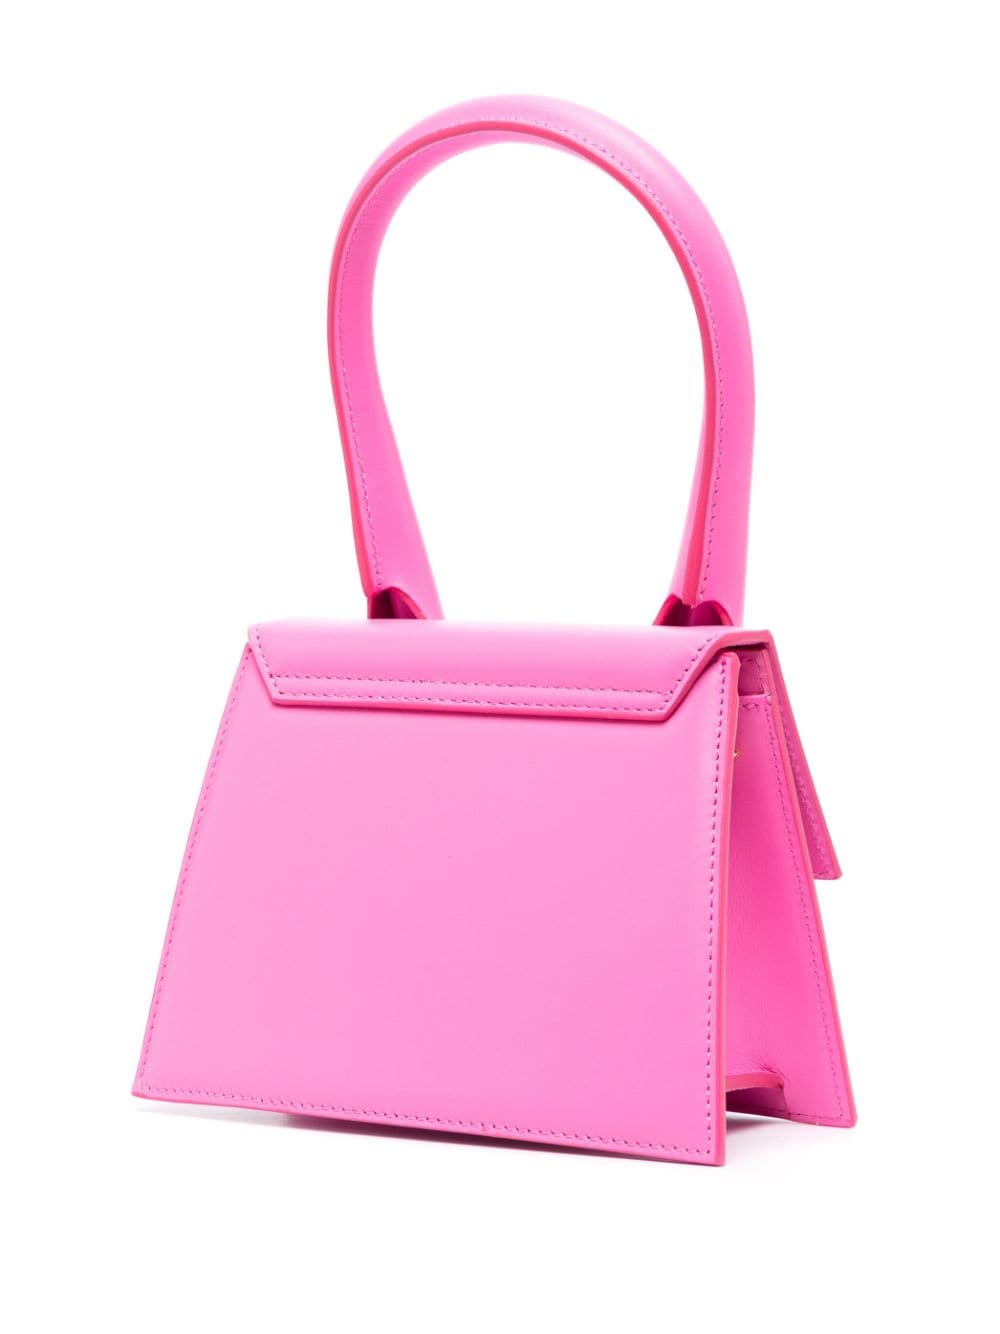 JACQUEMUS Fuchsia Pink Leather Handbag for Women - FW23 Collection